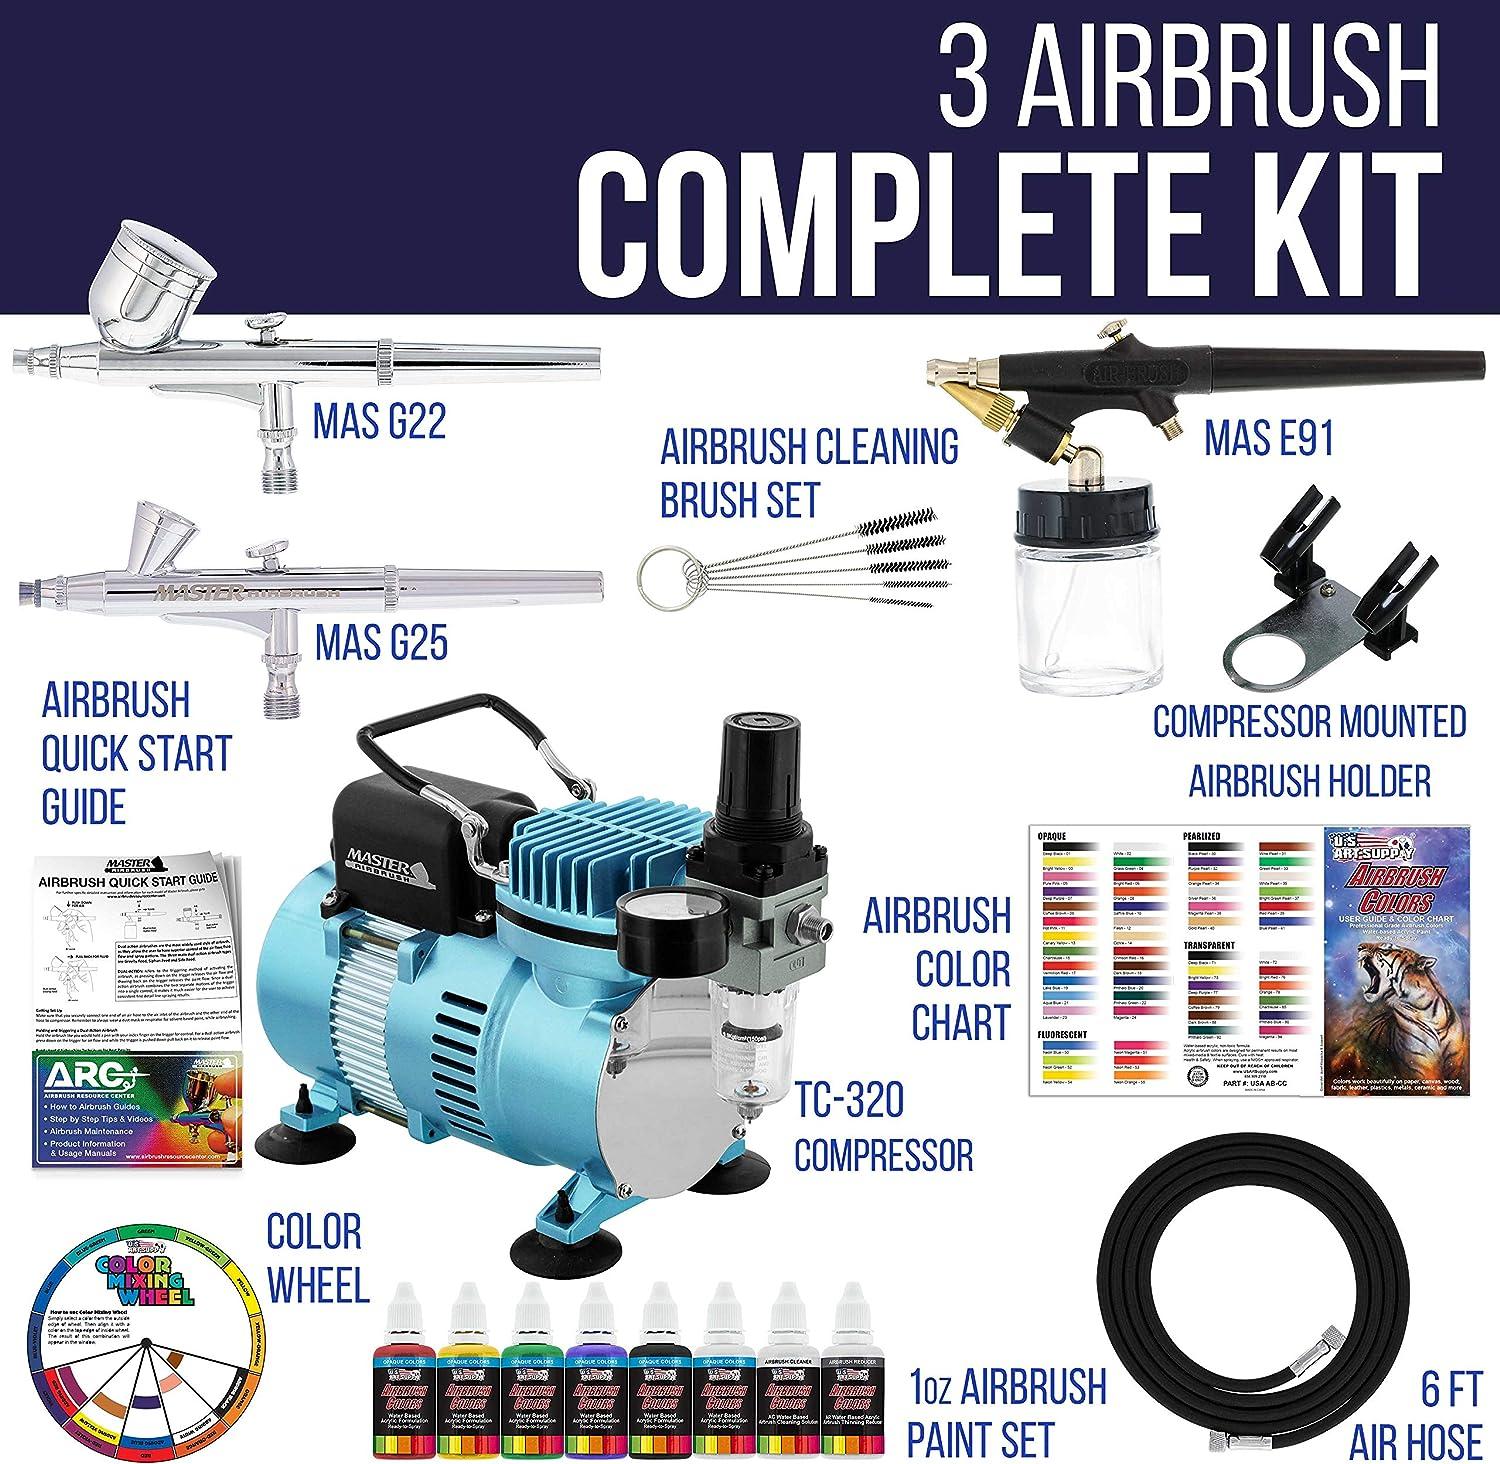 Master Airbrush Cool Runner II Dual Fan Air Compressor Professional  Airbrushing System Kit with 3 Airbrushes Gravity and Siphon Feed - 6  Primary Opaque Colors Acrylic Paint Artist Set - How to Guide